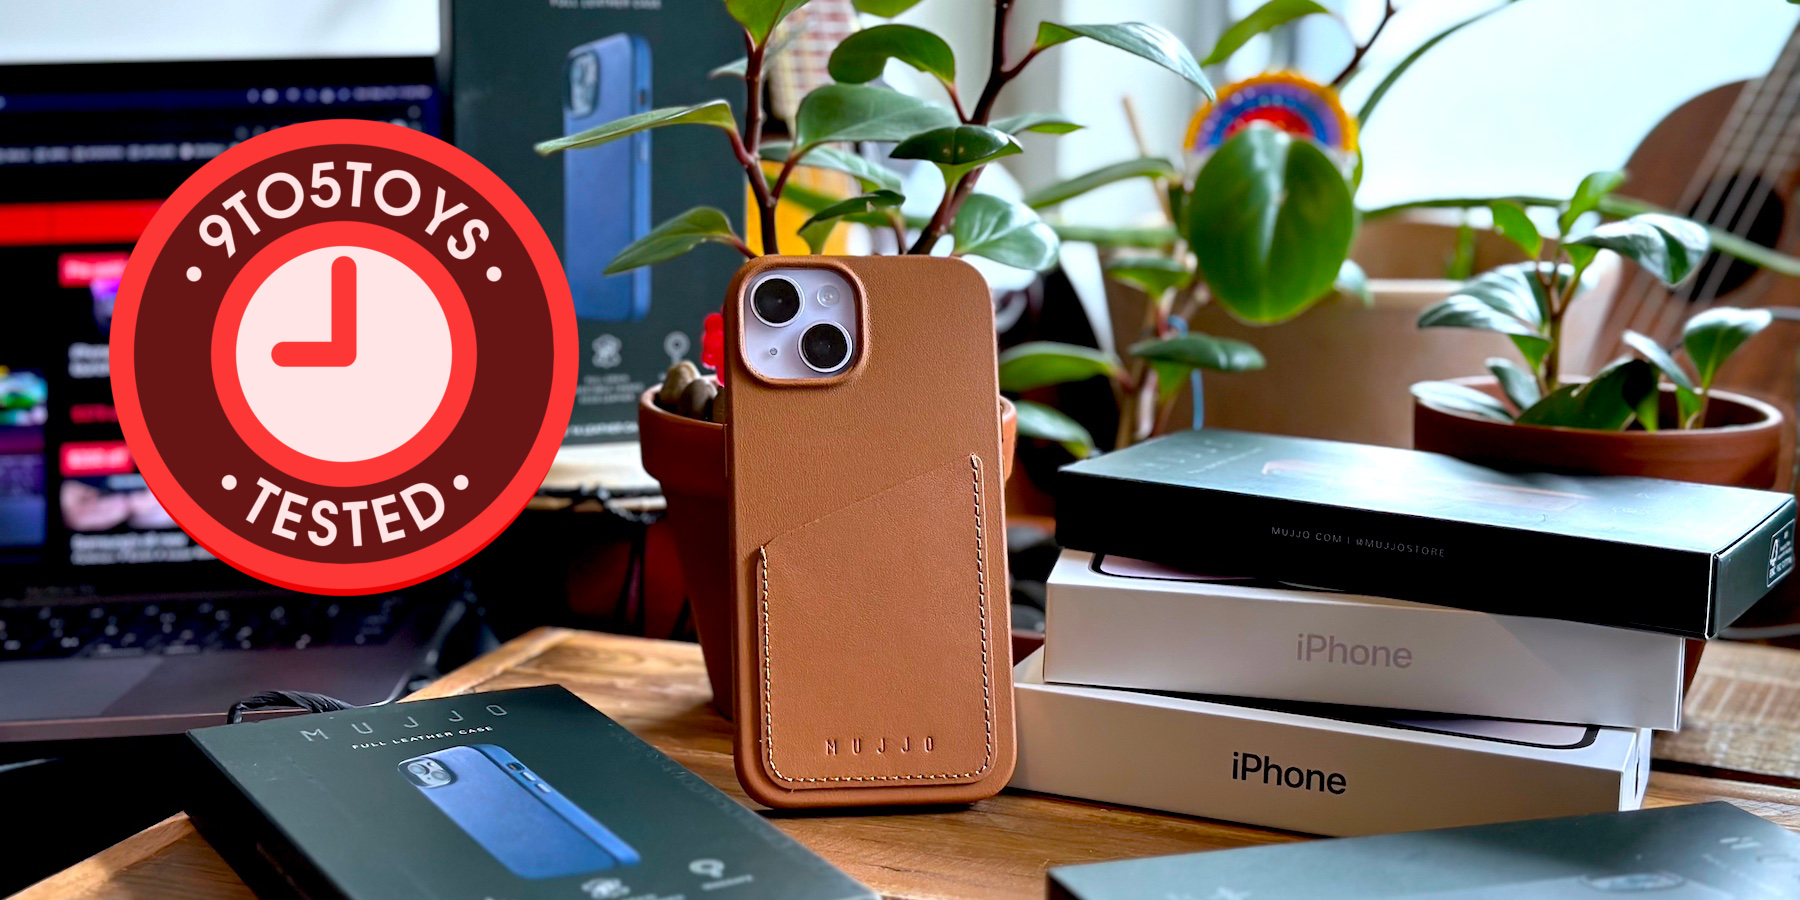 Leather iPhone 14 cases from MUJJO with metal buttons